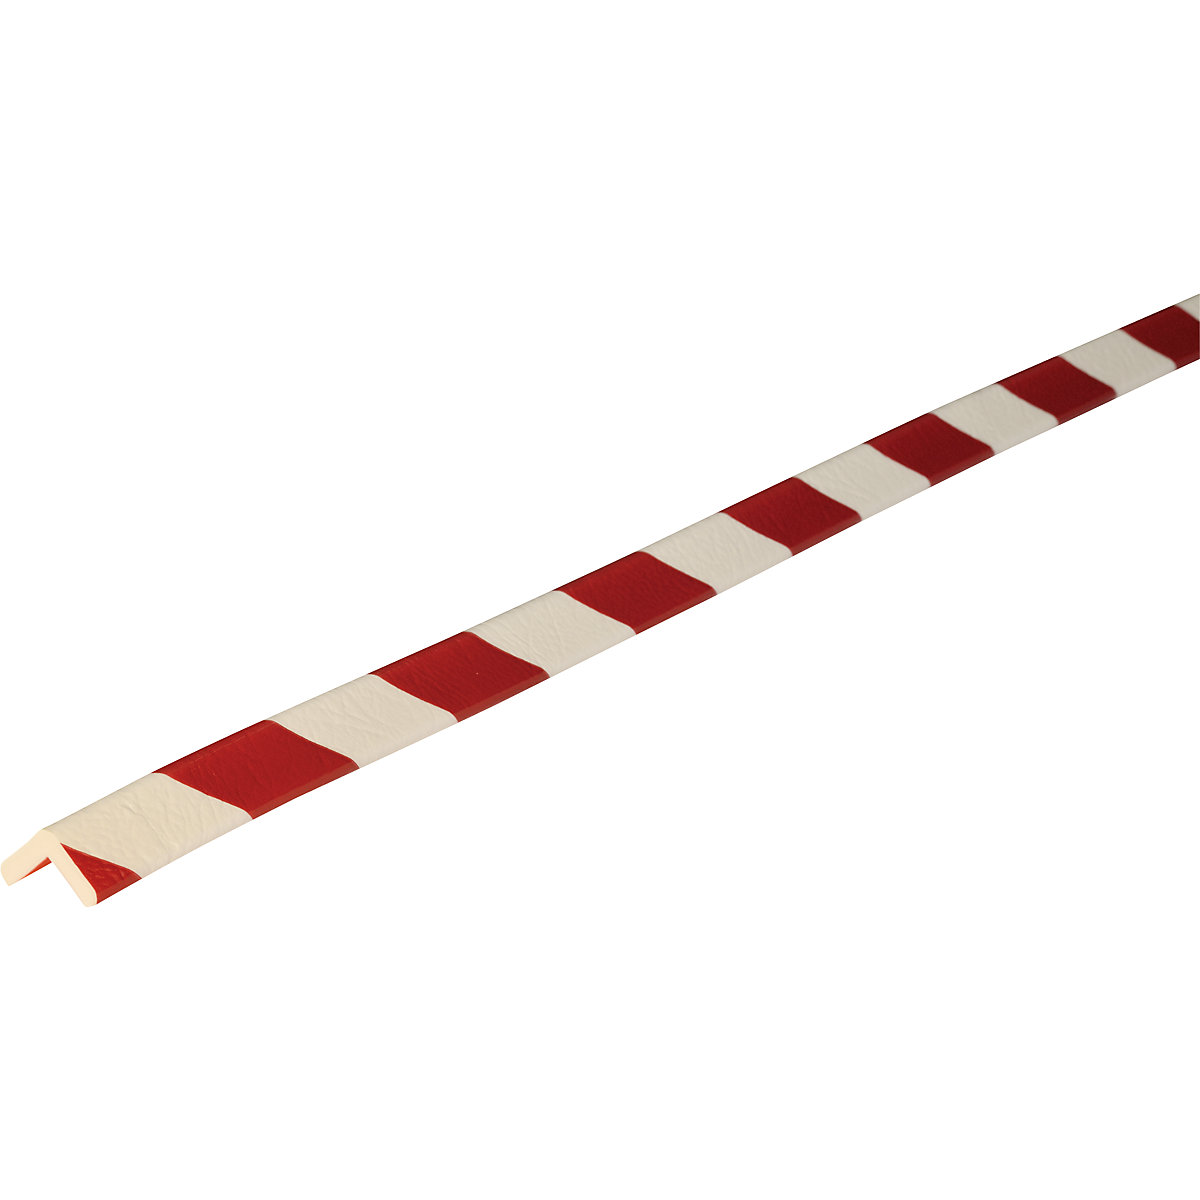 Knuffi® corner protection – SHG, type E, 1 x 50 m roll, red / white-13